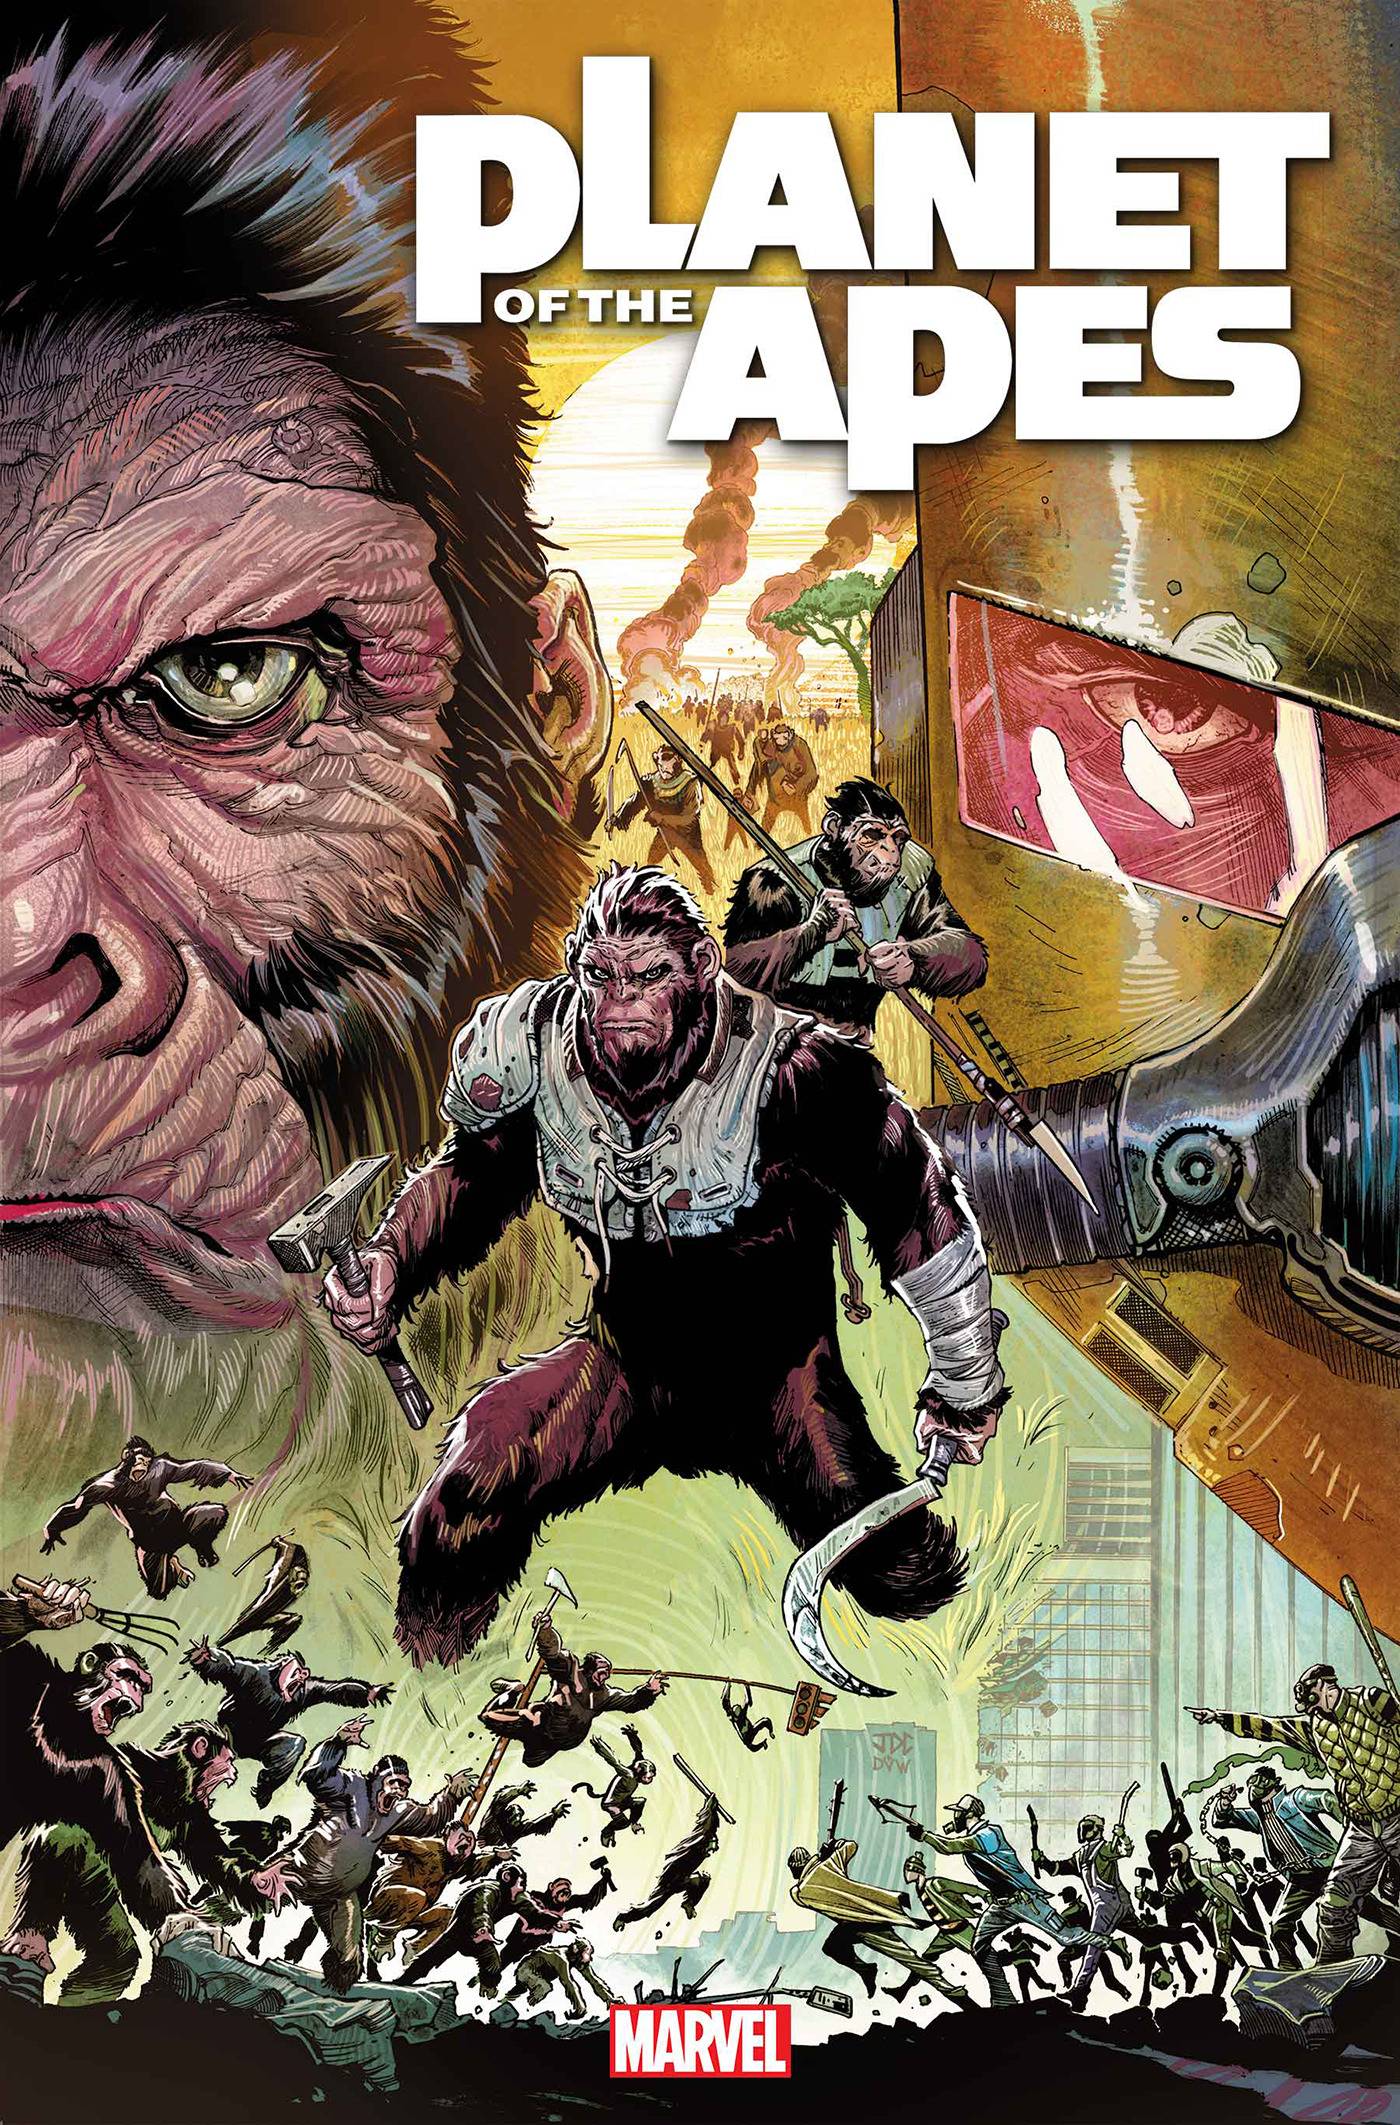 PLANET OF THE APES #1 POSTER